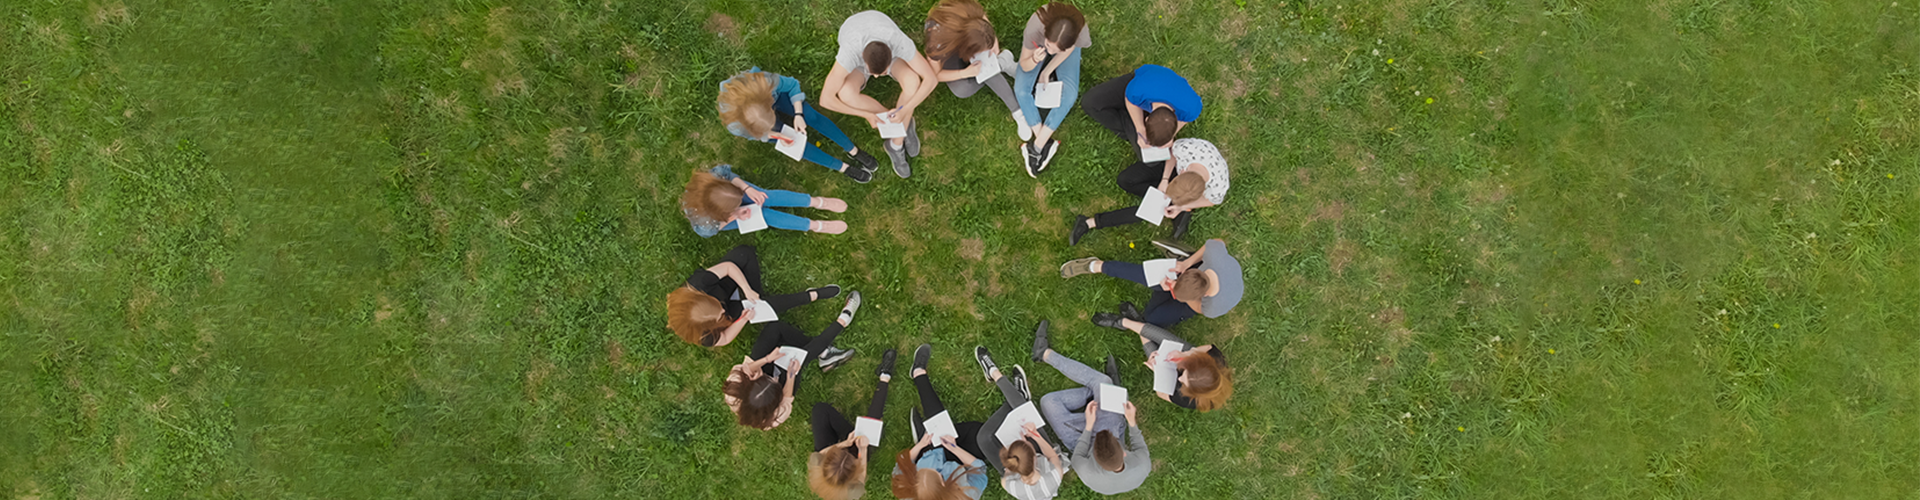 Group of people sitting in circle in grass